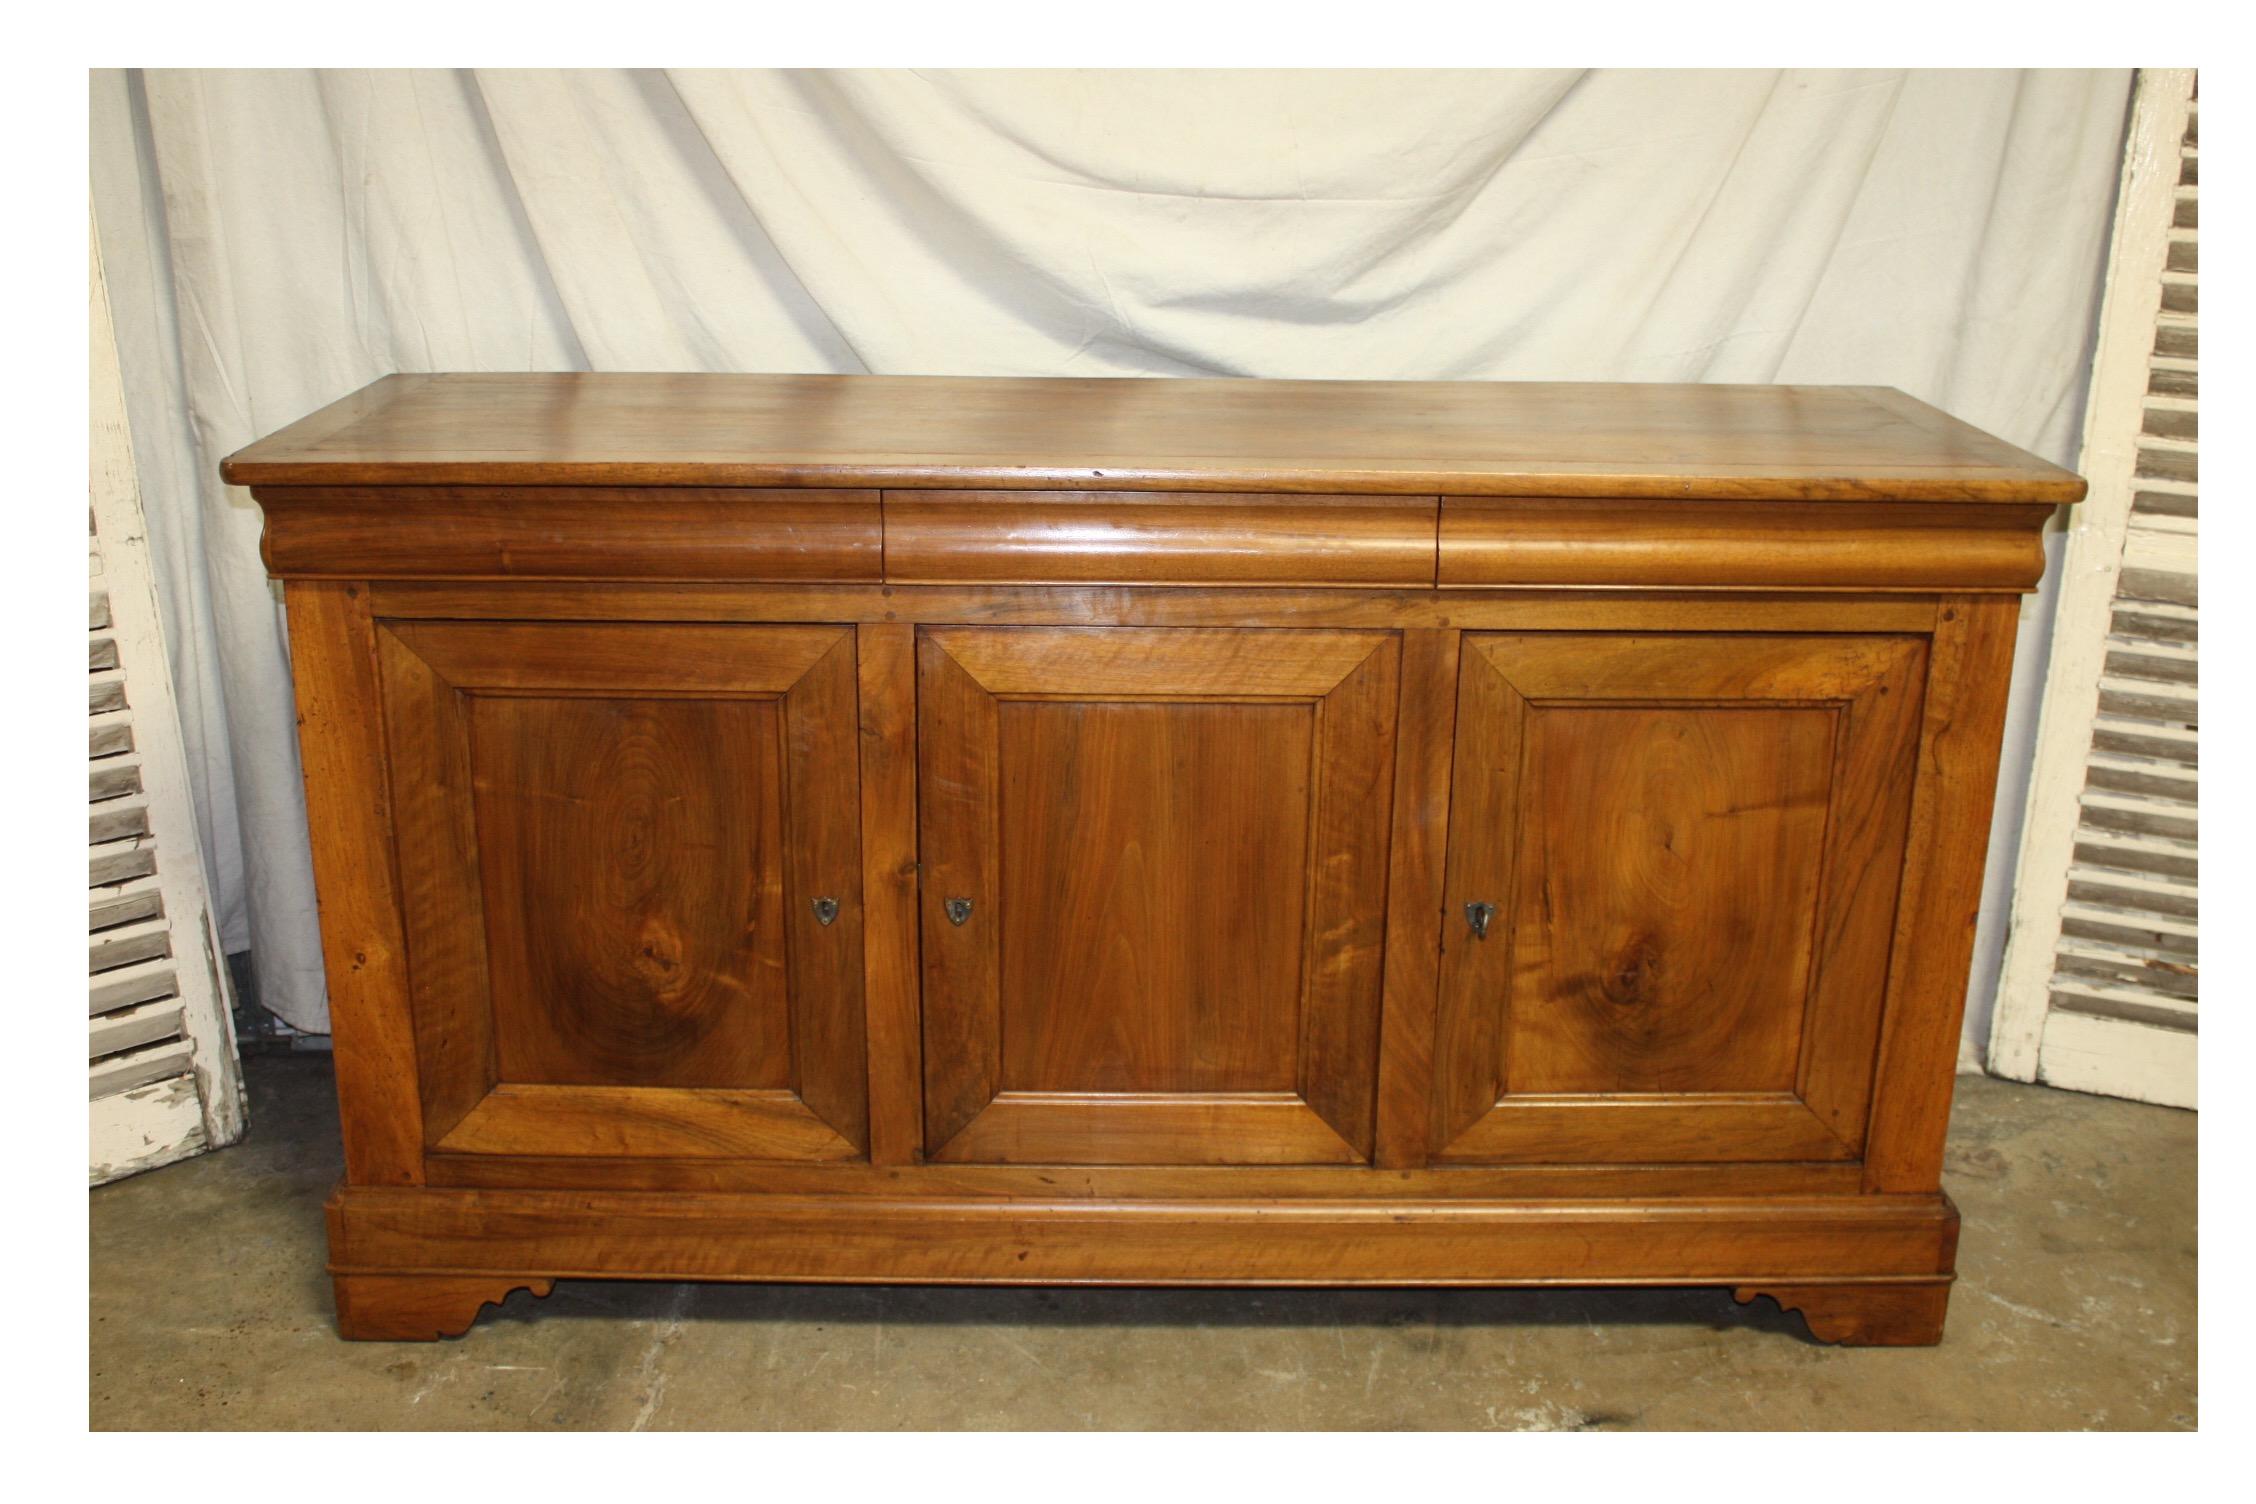 Beautiful 19th century French sideboard.